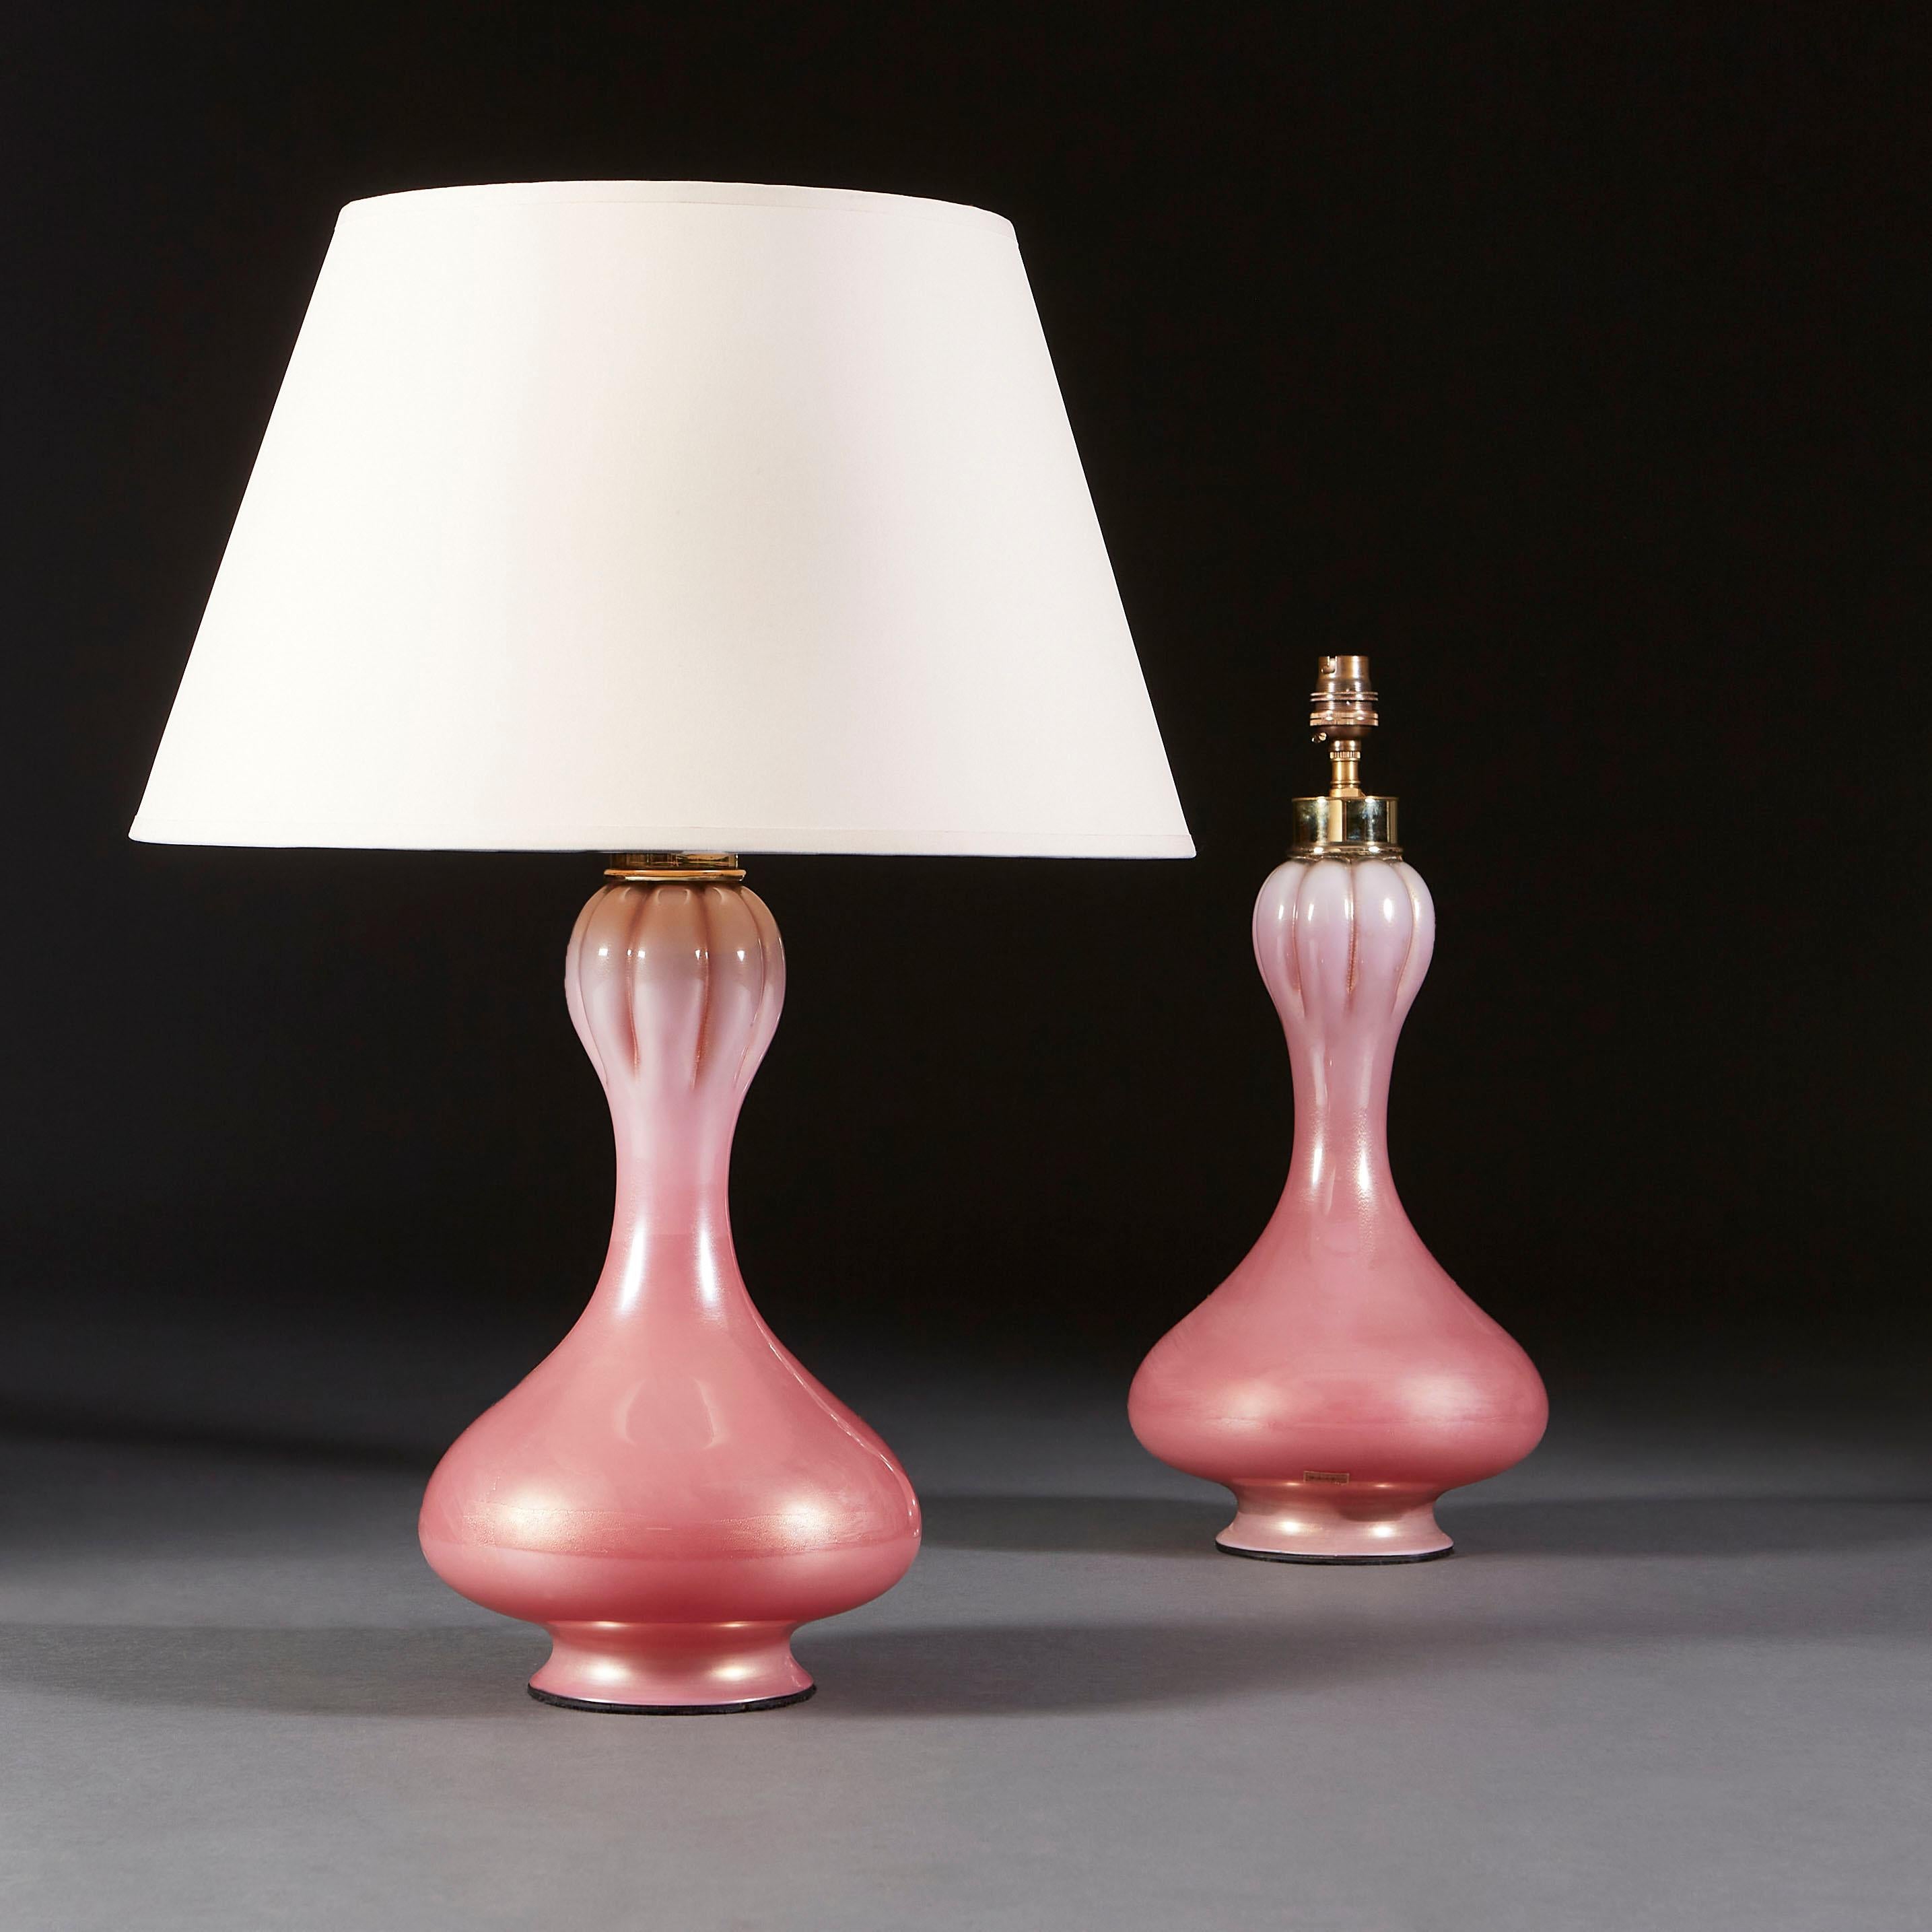 A fine pair of pink Seguso lamps of organic form, with a bulbous base and fluting detail towards the neck of the lamp. The pair of lamps are also stamped with Seguso stickers of authenticity.

Seguso glass is the epitome of luxury glassware, known